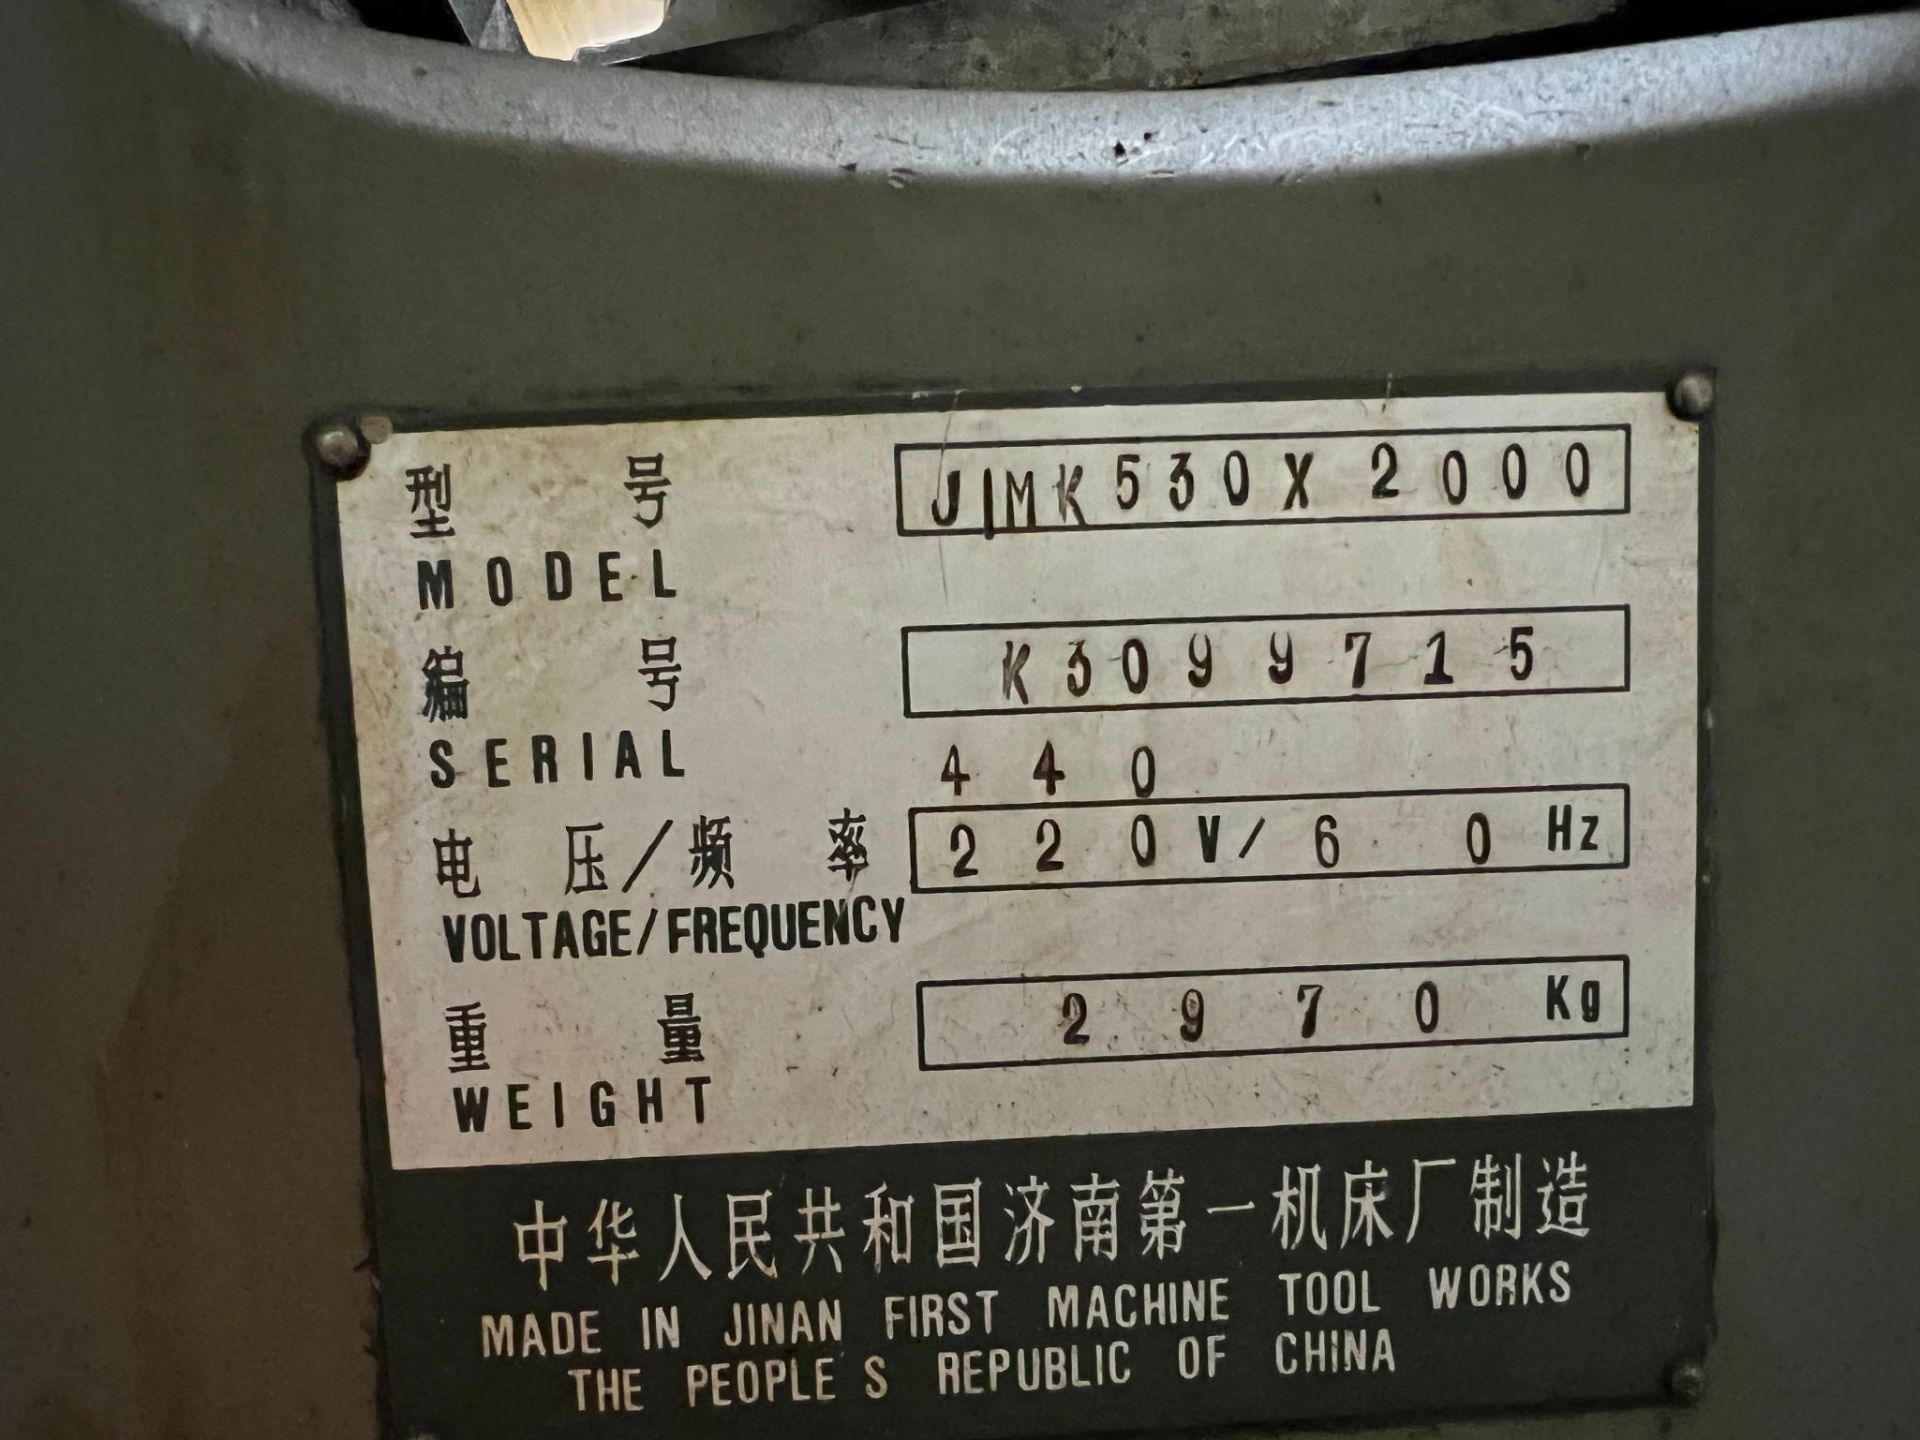 Kingston HLC-2180 (JIMK530x2000) Gap Bed Engine lathe Serial Number K3099715. 21" x 80" Swing over b - Image 19 of 21